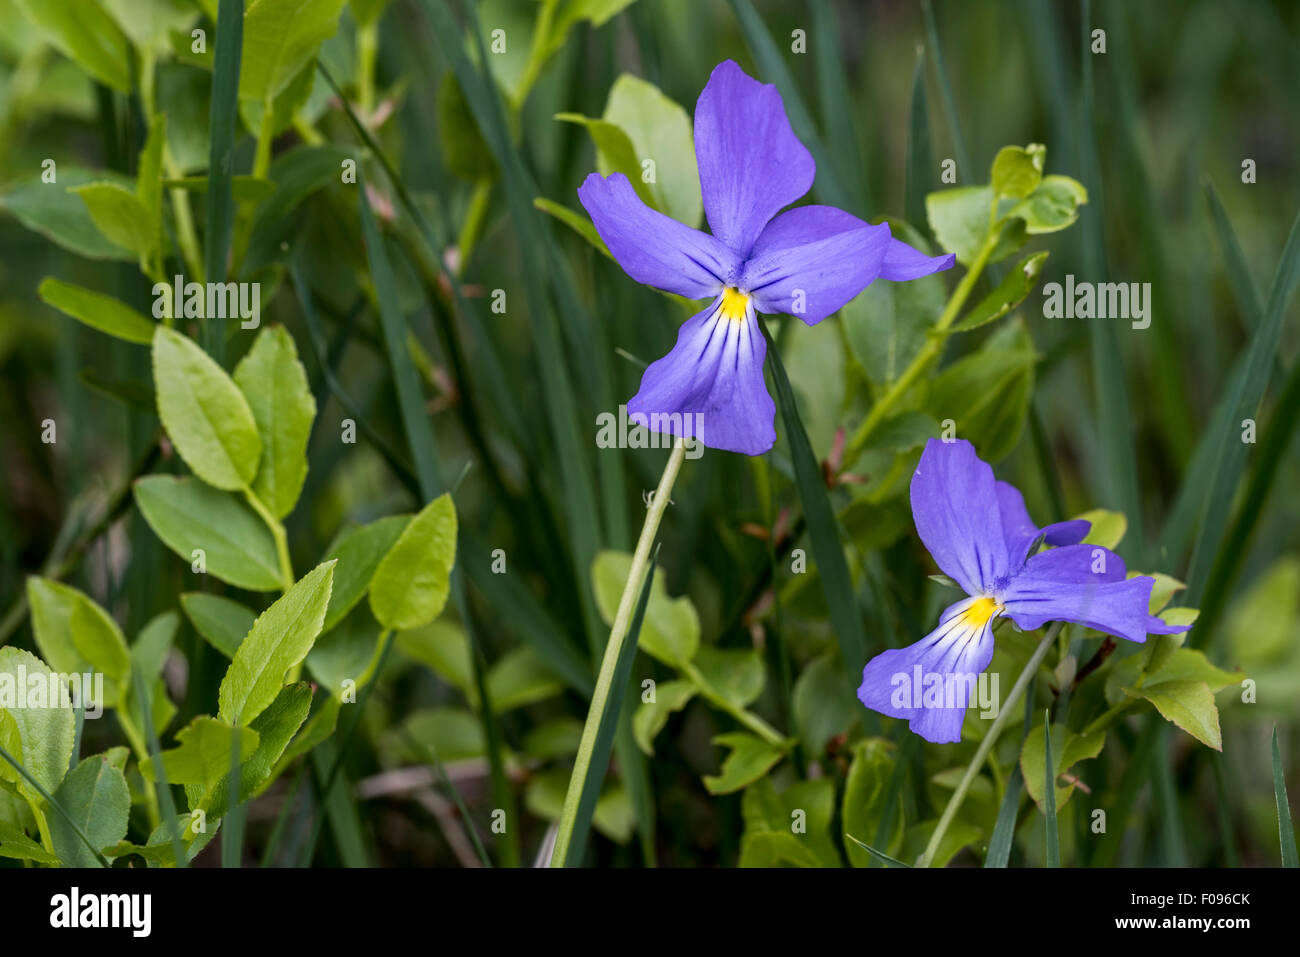 Long-spurred violet / long-spurred pansy / mountain violet (Viola calcarata) in flower in the Alps Stock Photo